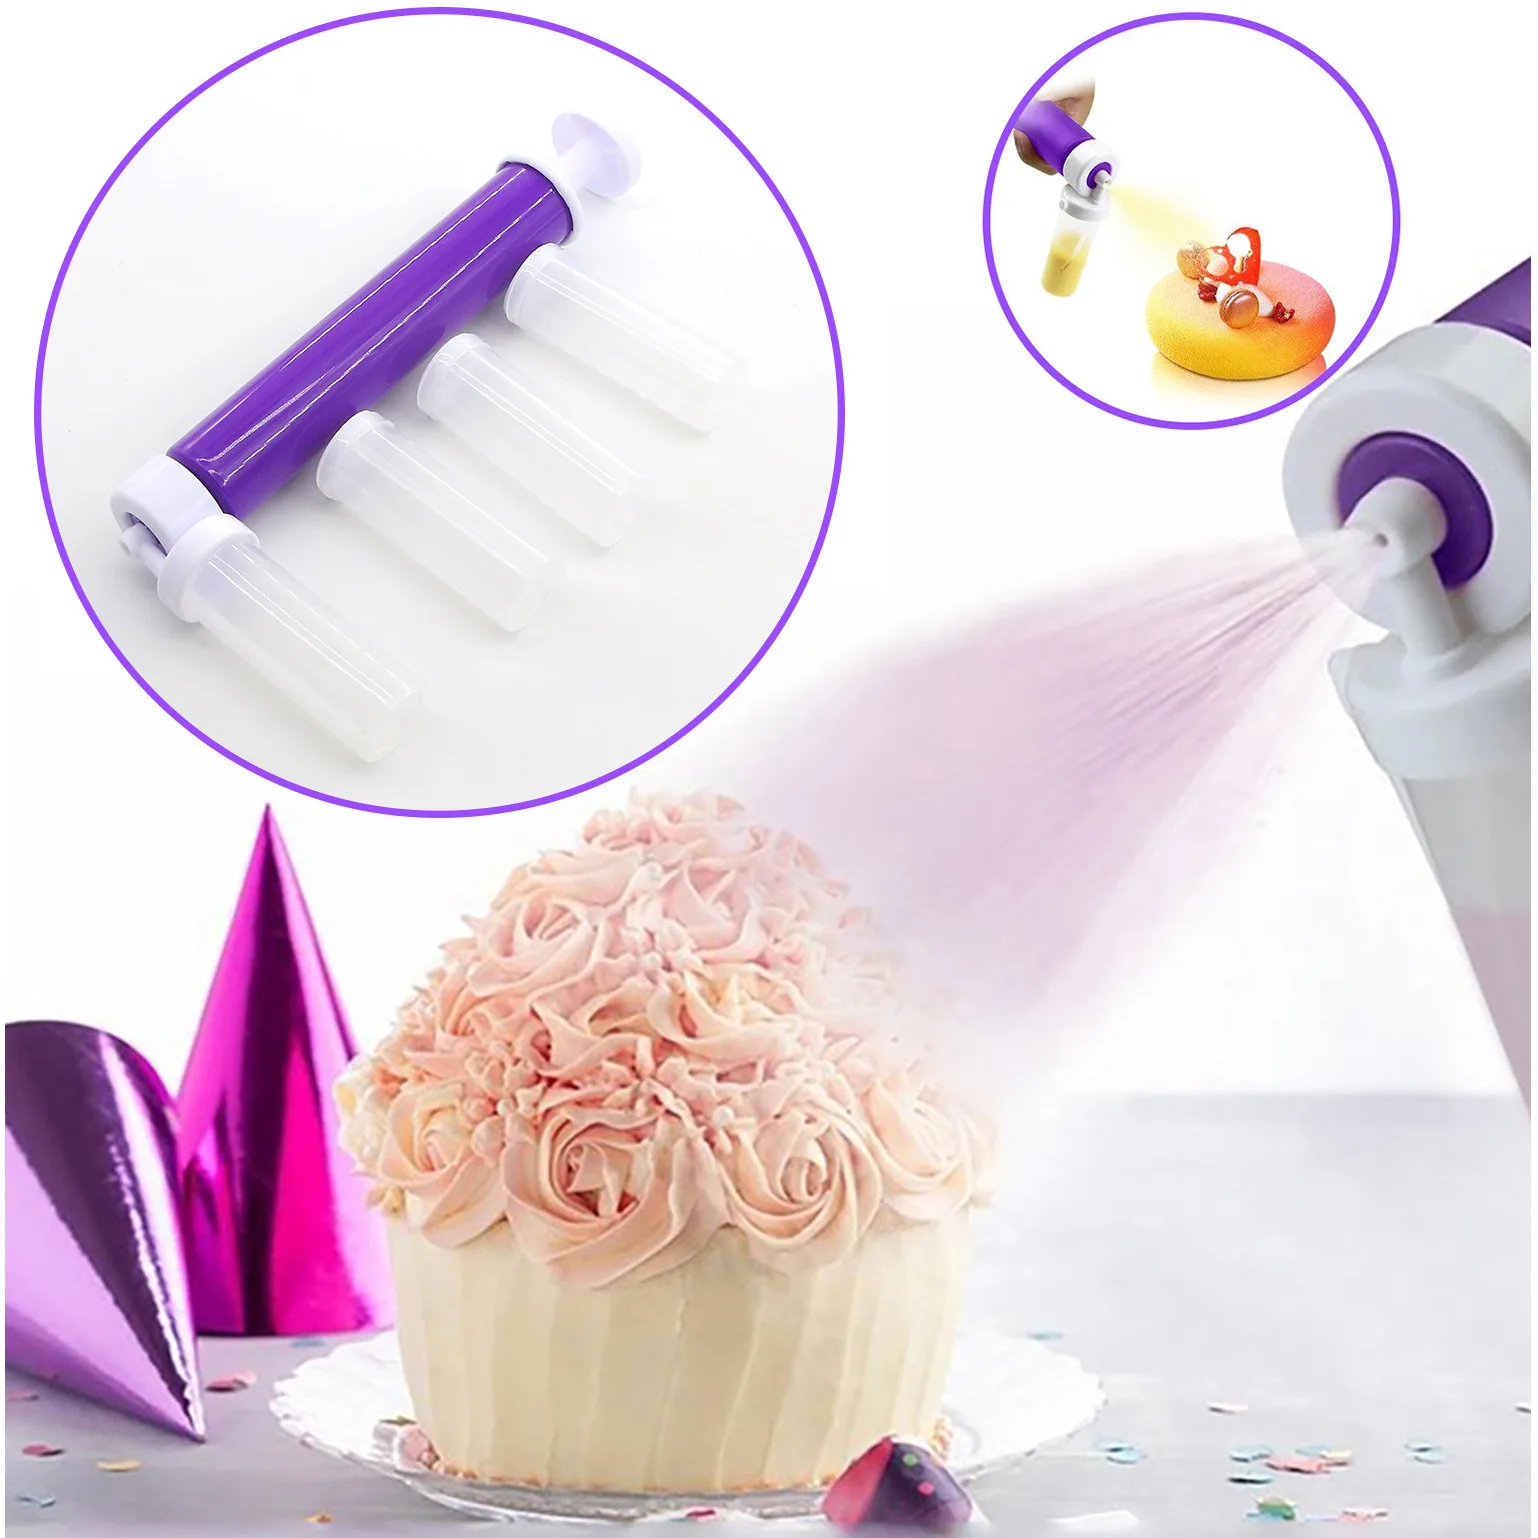 

Cake Manual Airbrush Cakes Coloring Manual Spray Guns Kit Baking DIY Pressure Spray Tube with 4 Containers